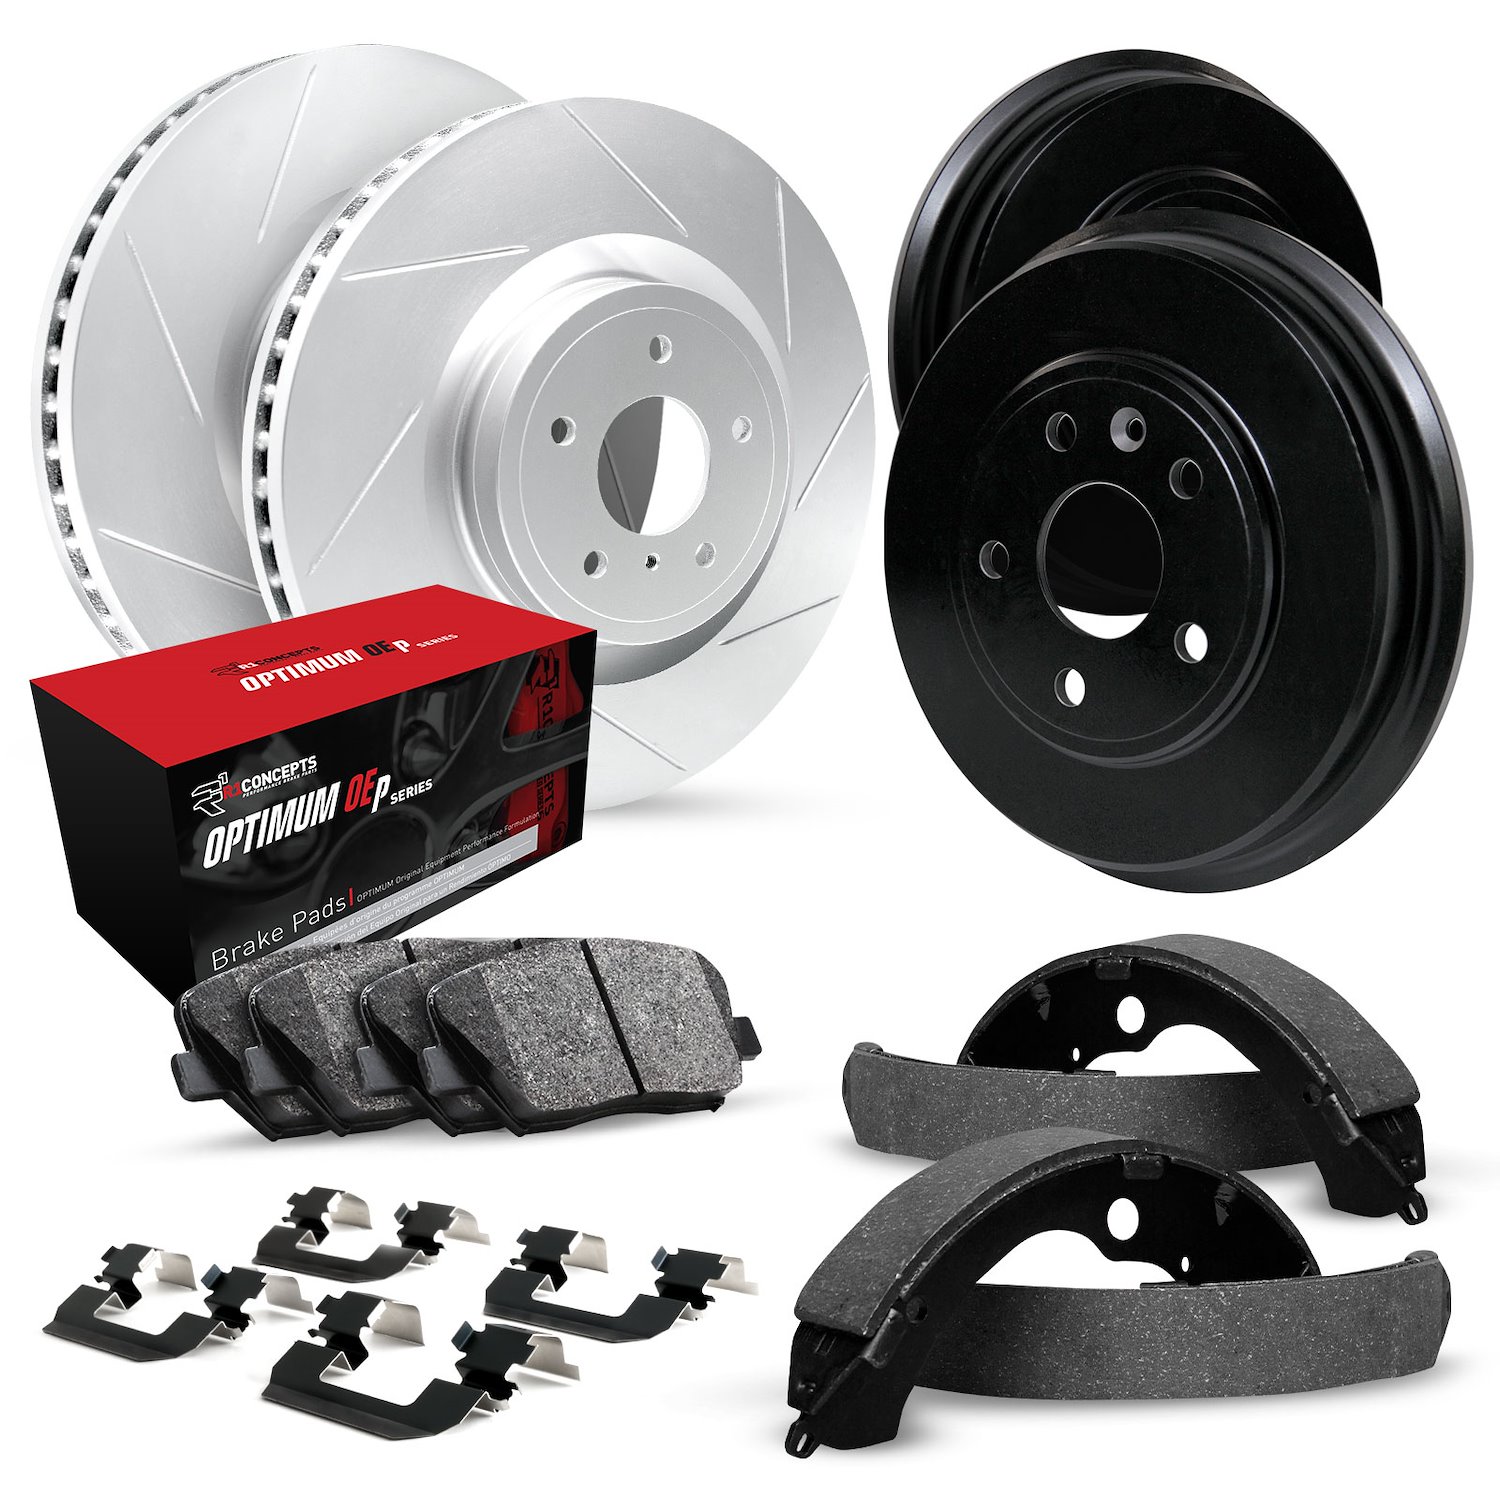 GEO-Carbon Slotted Brake Rotor & Drum Set w/Optimum OE Pads, Shoes, & Hardware, 1995-2003 Ford/Lincoln/Mercury/Mazda